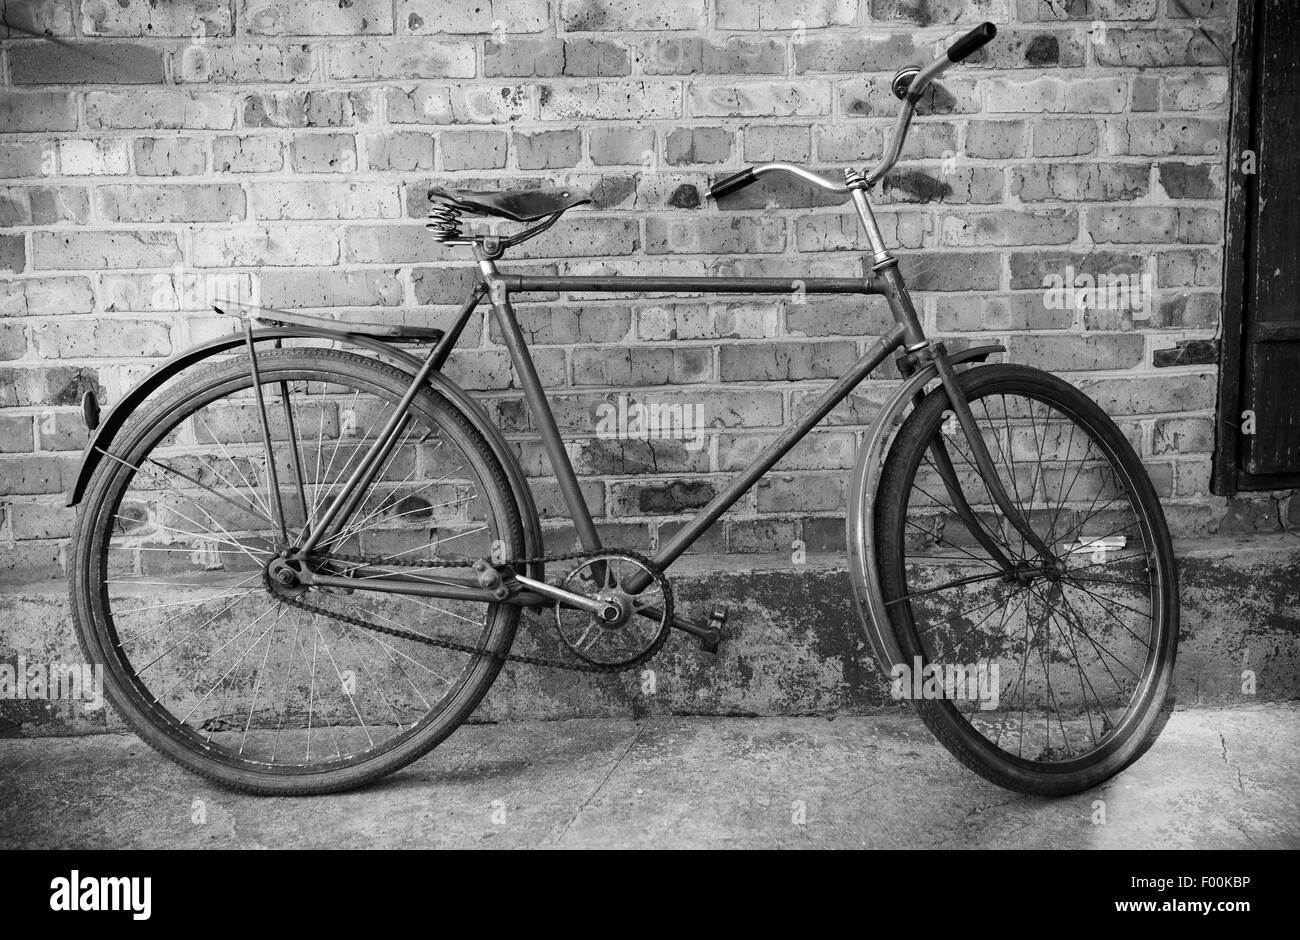 Old retro bicycle against brick wal, bw photol Stock Photo